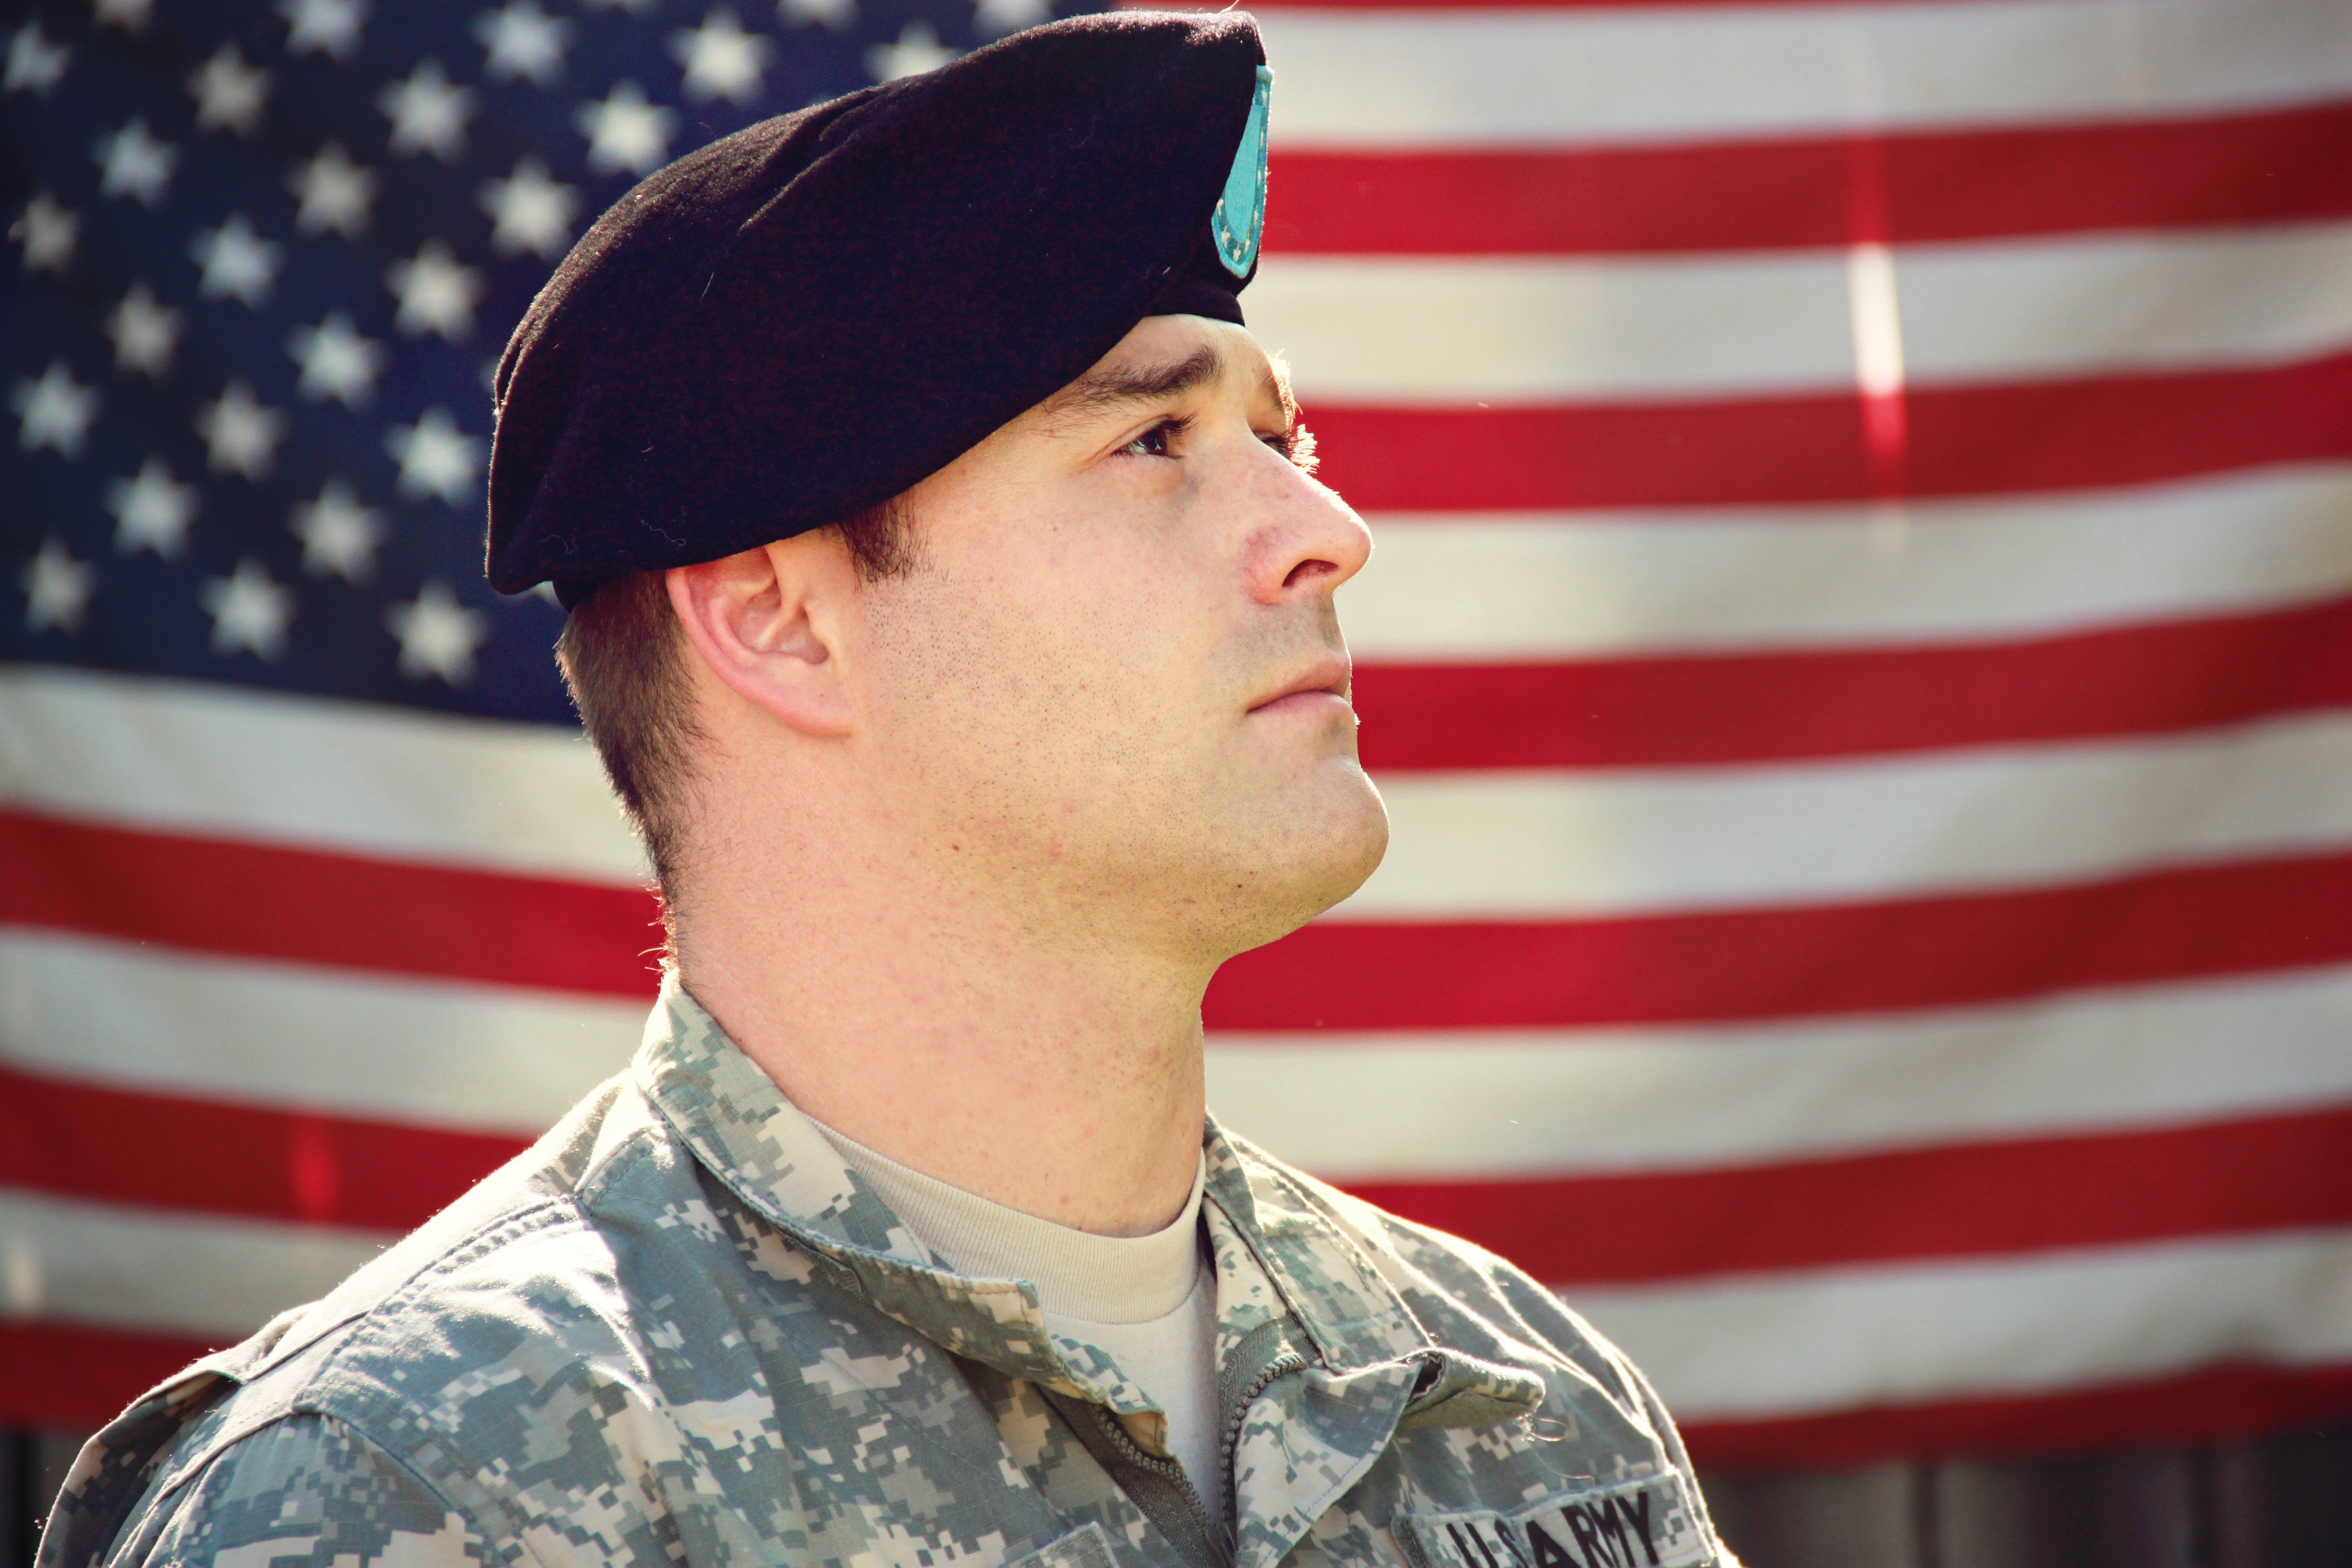 A soldier honoring the flag | Photo: Pexels